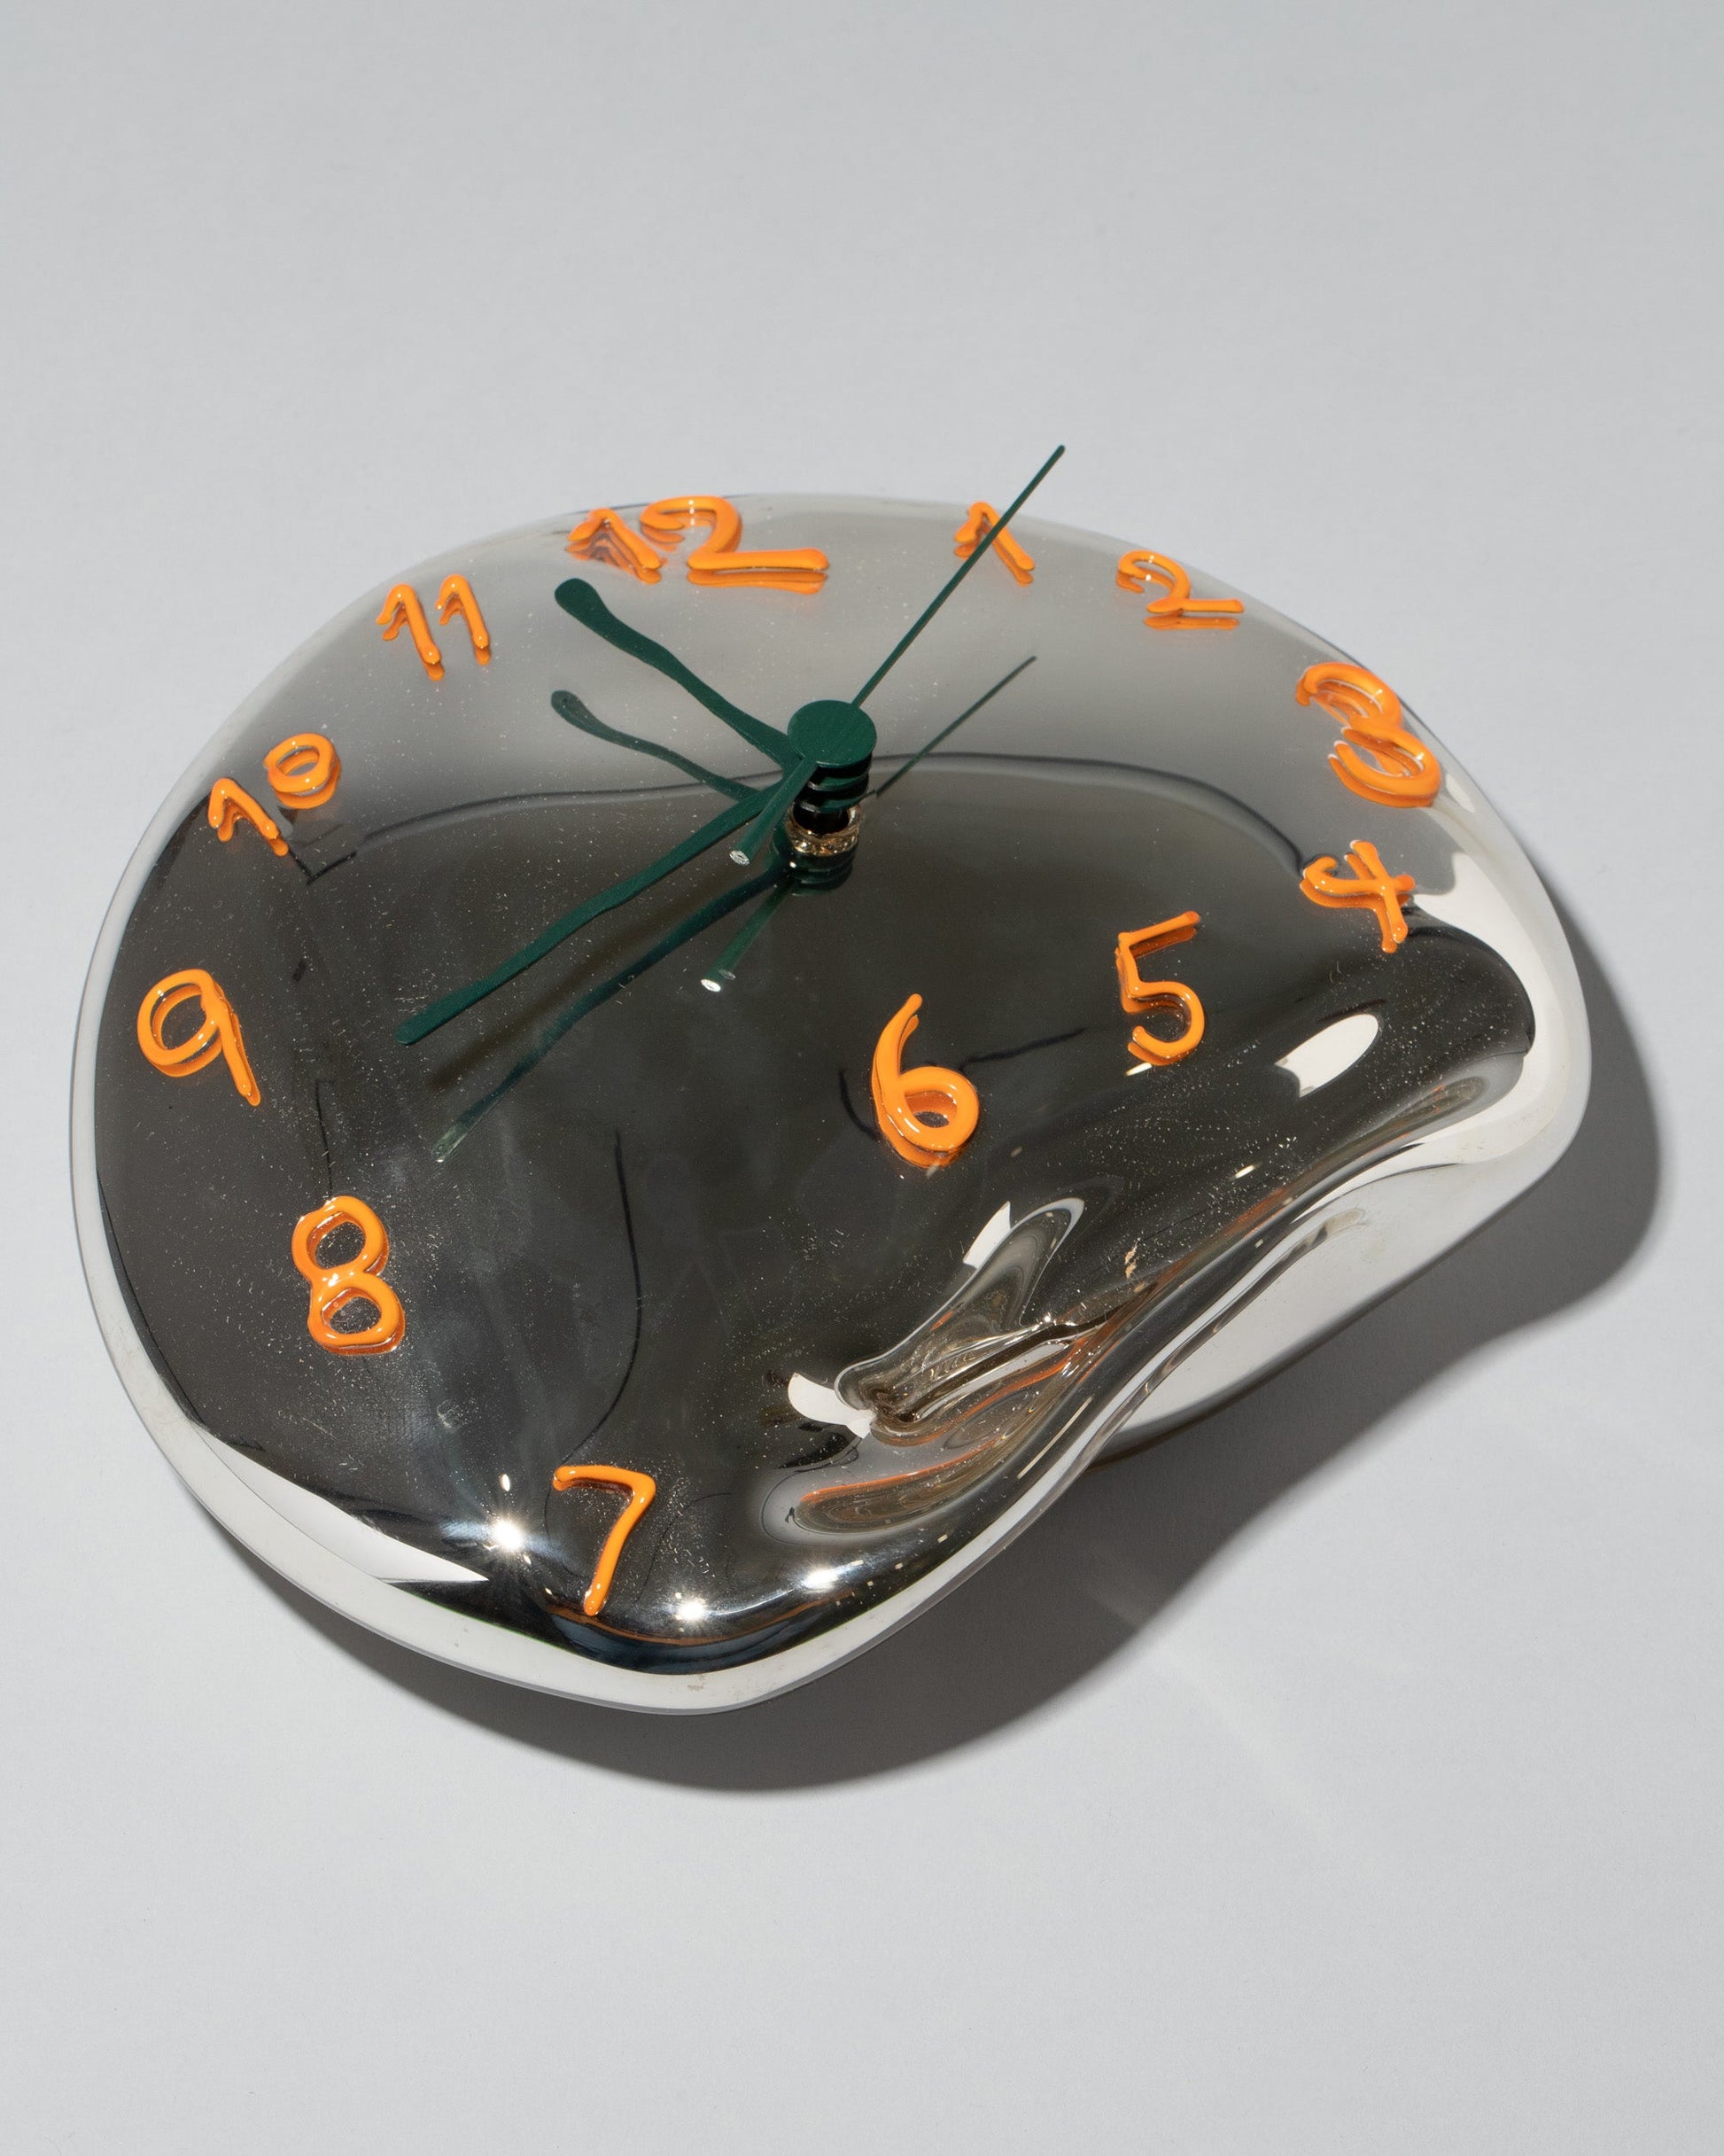 Silje Lindrup Orange Two Glass Wall Clock on light color background.